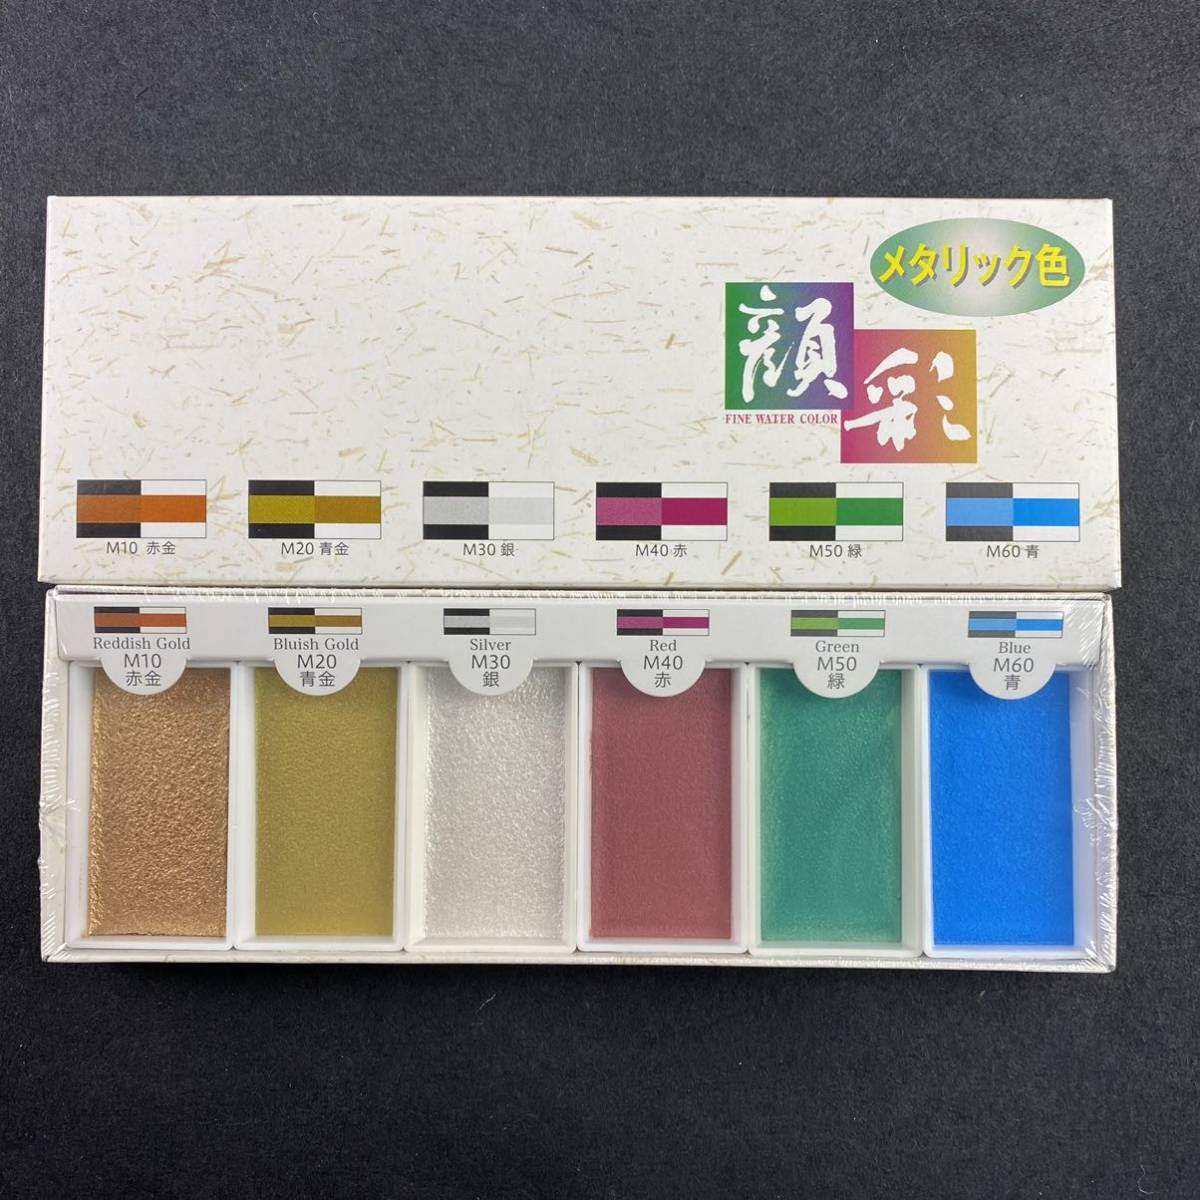  watercolor gansai metallic 6 color set ...15500 watercolor gansai pigment picture letter water ink picture watercolor painting coating picture material paints free shipping 